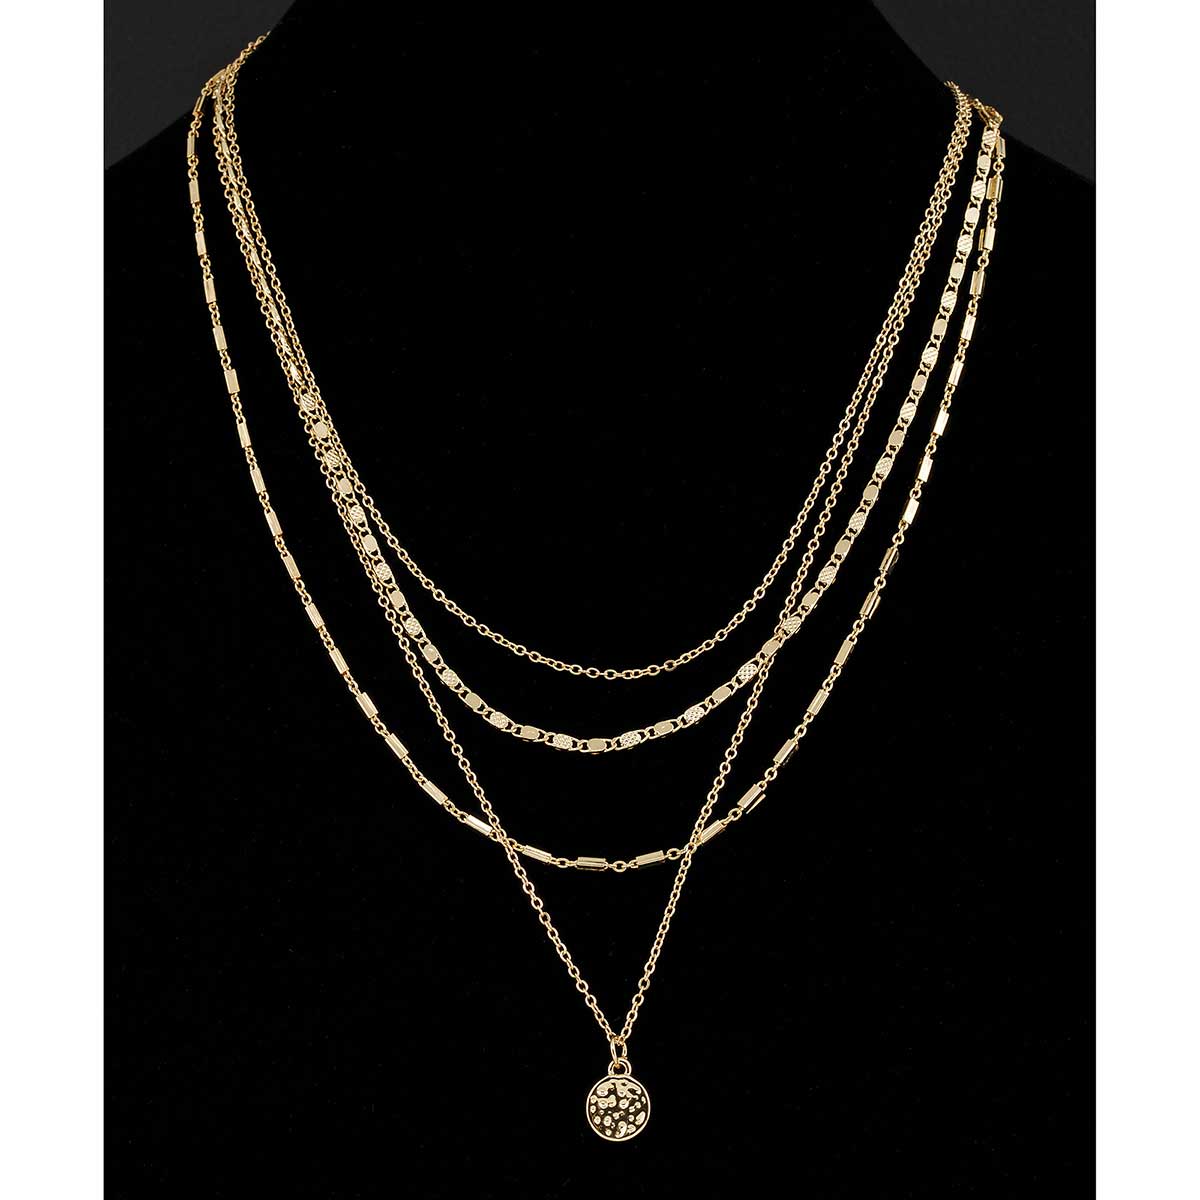 NECKLACE 4 LAYER DISC GOLD